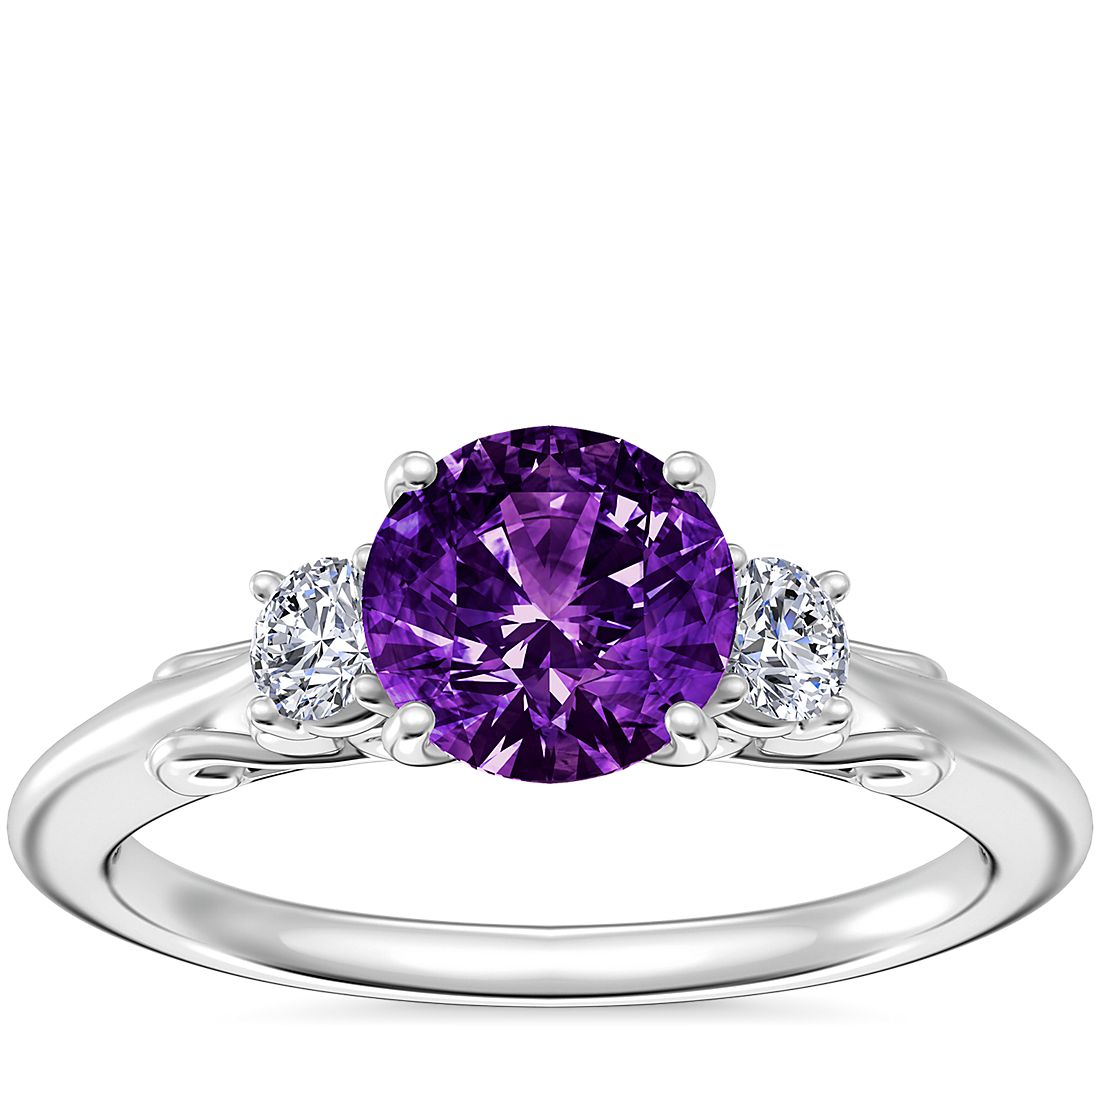 Vintage Three Stone Engagement Ring with Round Amethyst in Platinum (6.5mm)